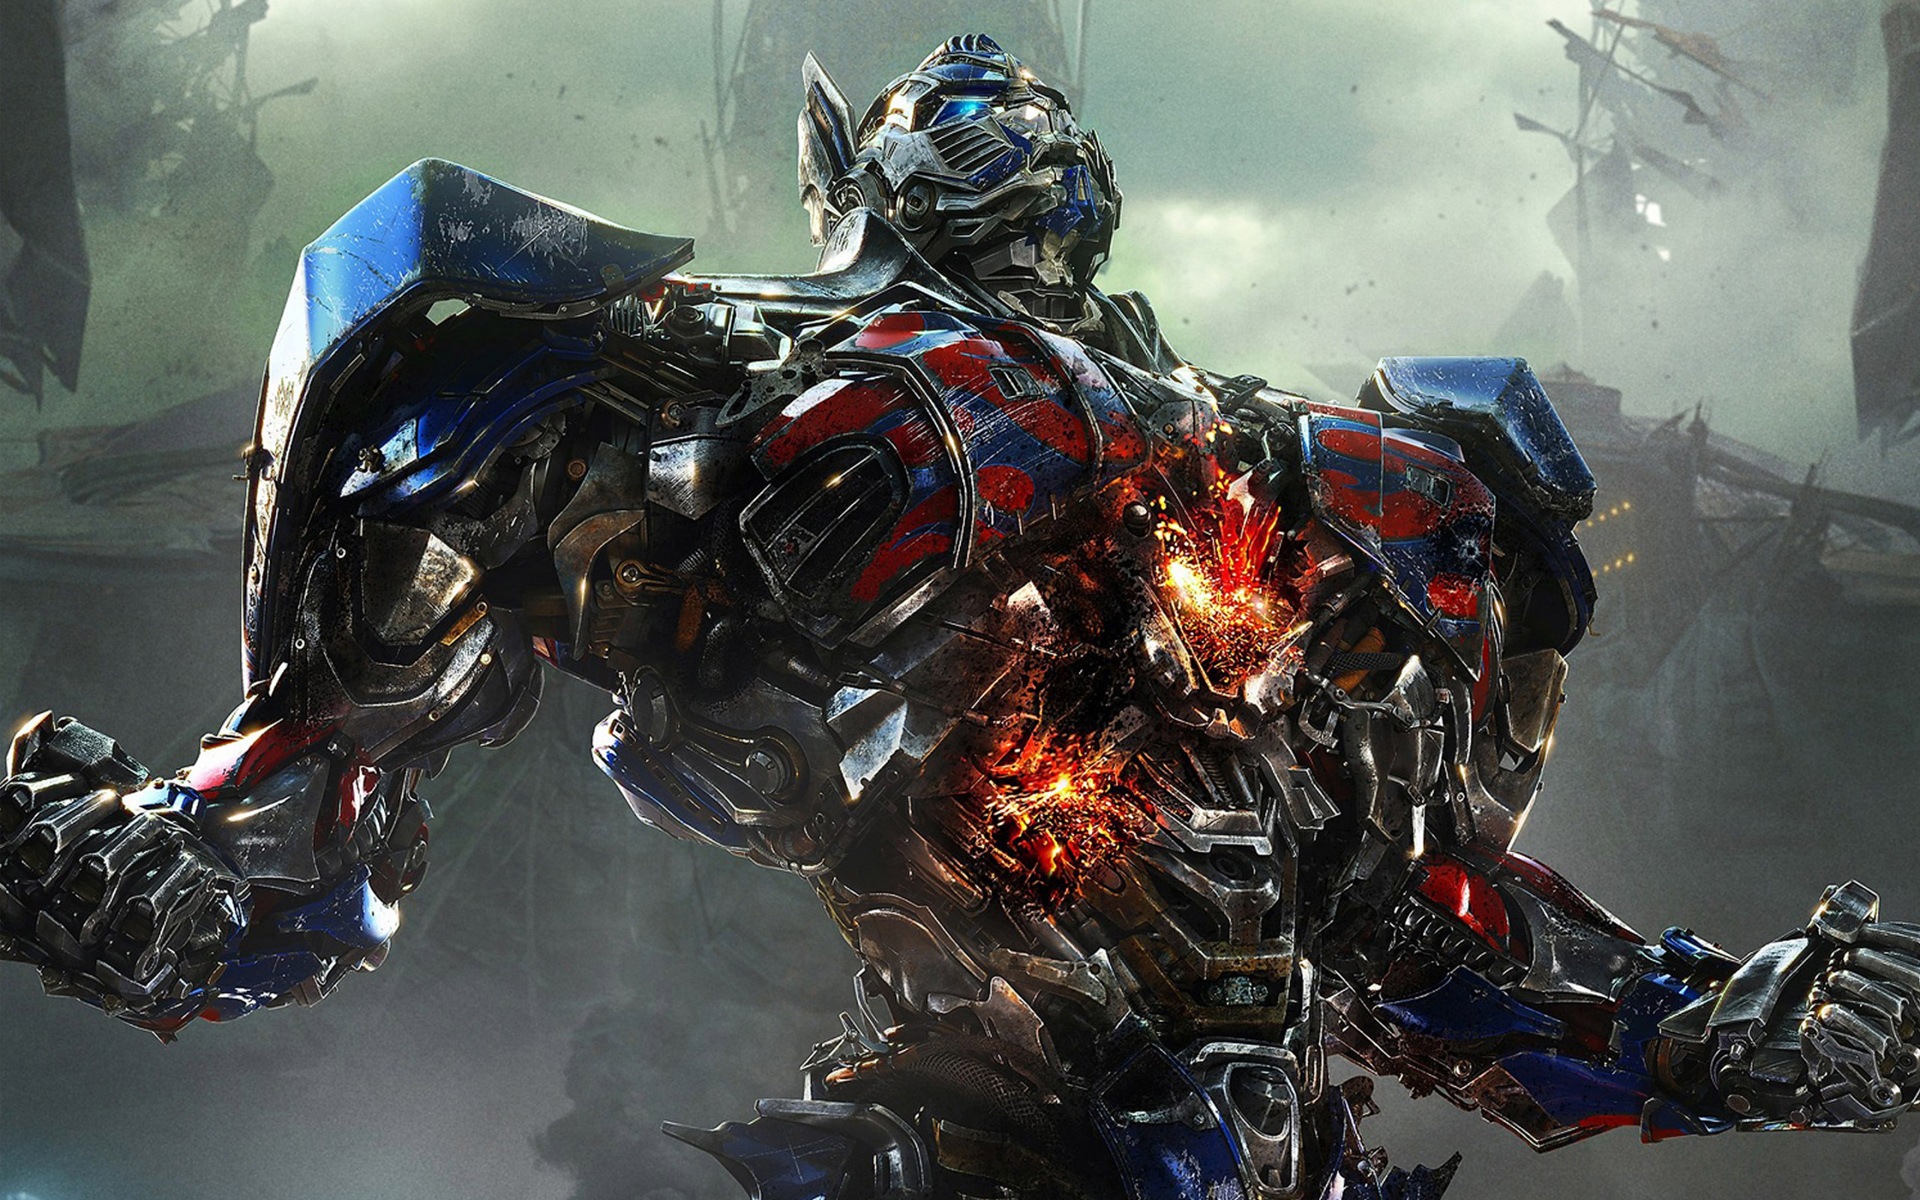 2014 Transformers: Age of Extinction HD tapety #5 - 1920x1200